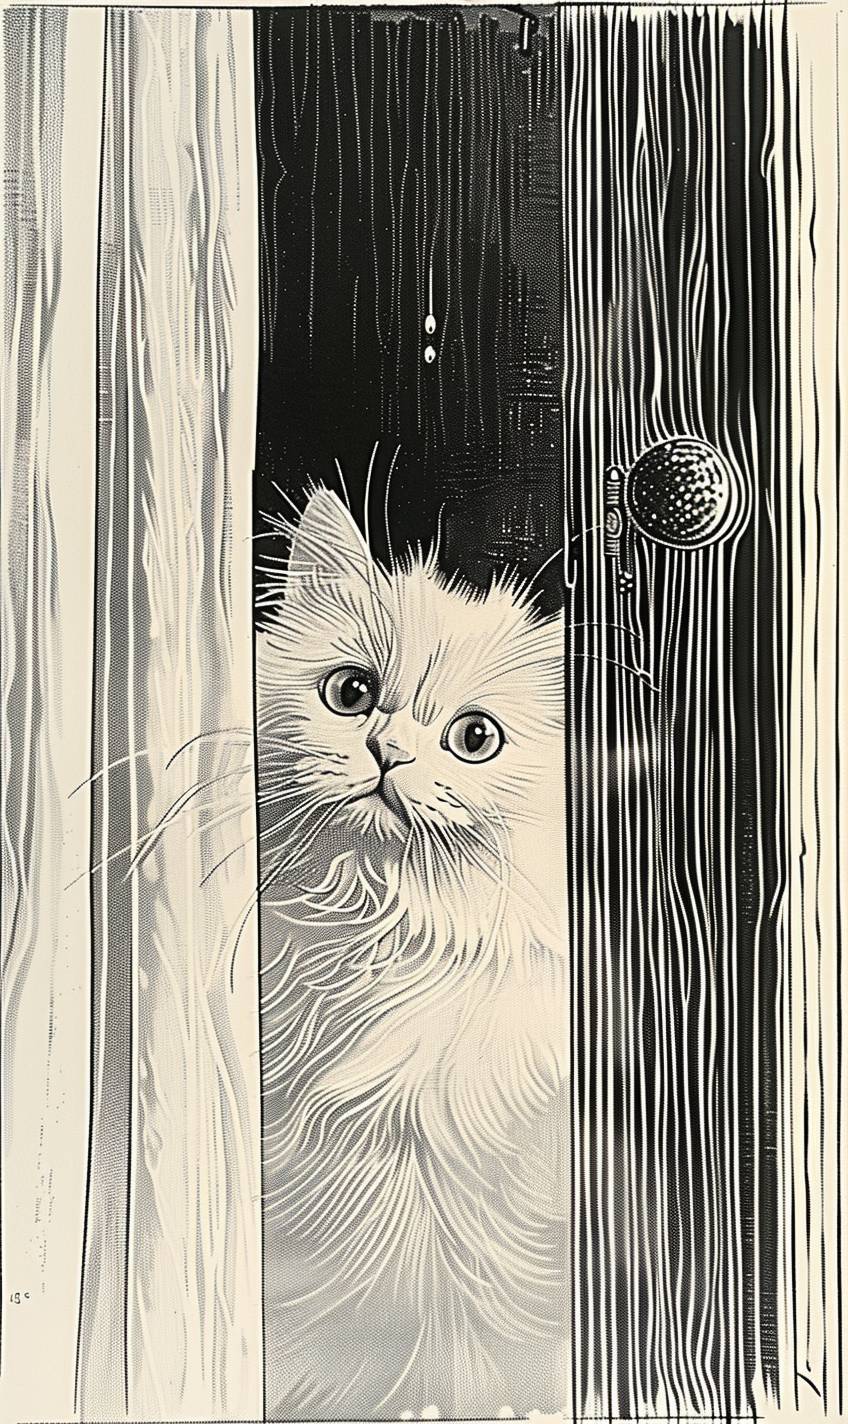 Aubrey Vincent Beardsley: A white, low-nosed, round-eyed Persian cat curiously peeking out of a fitting room with a long curtain